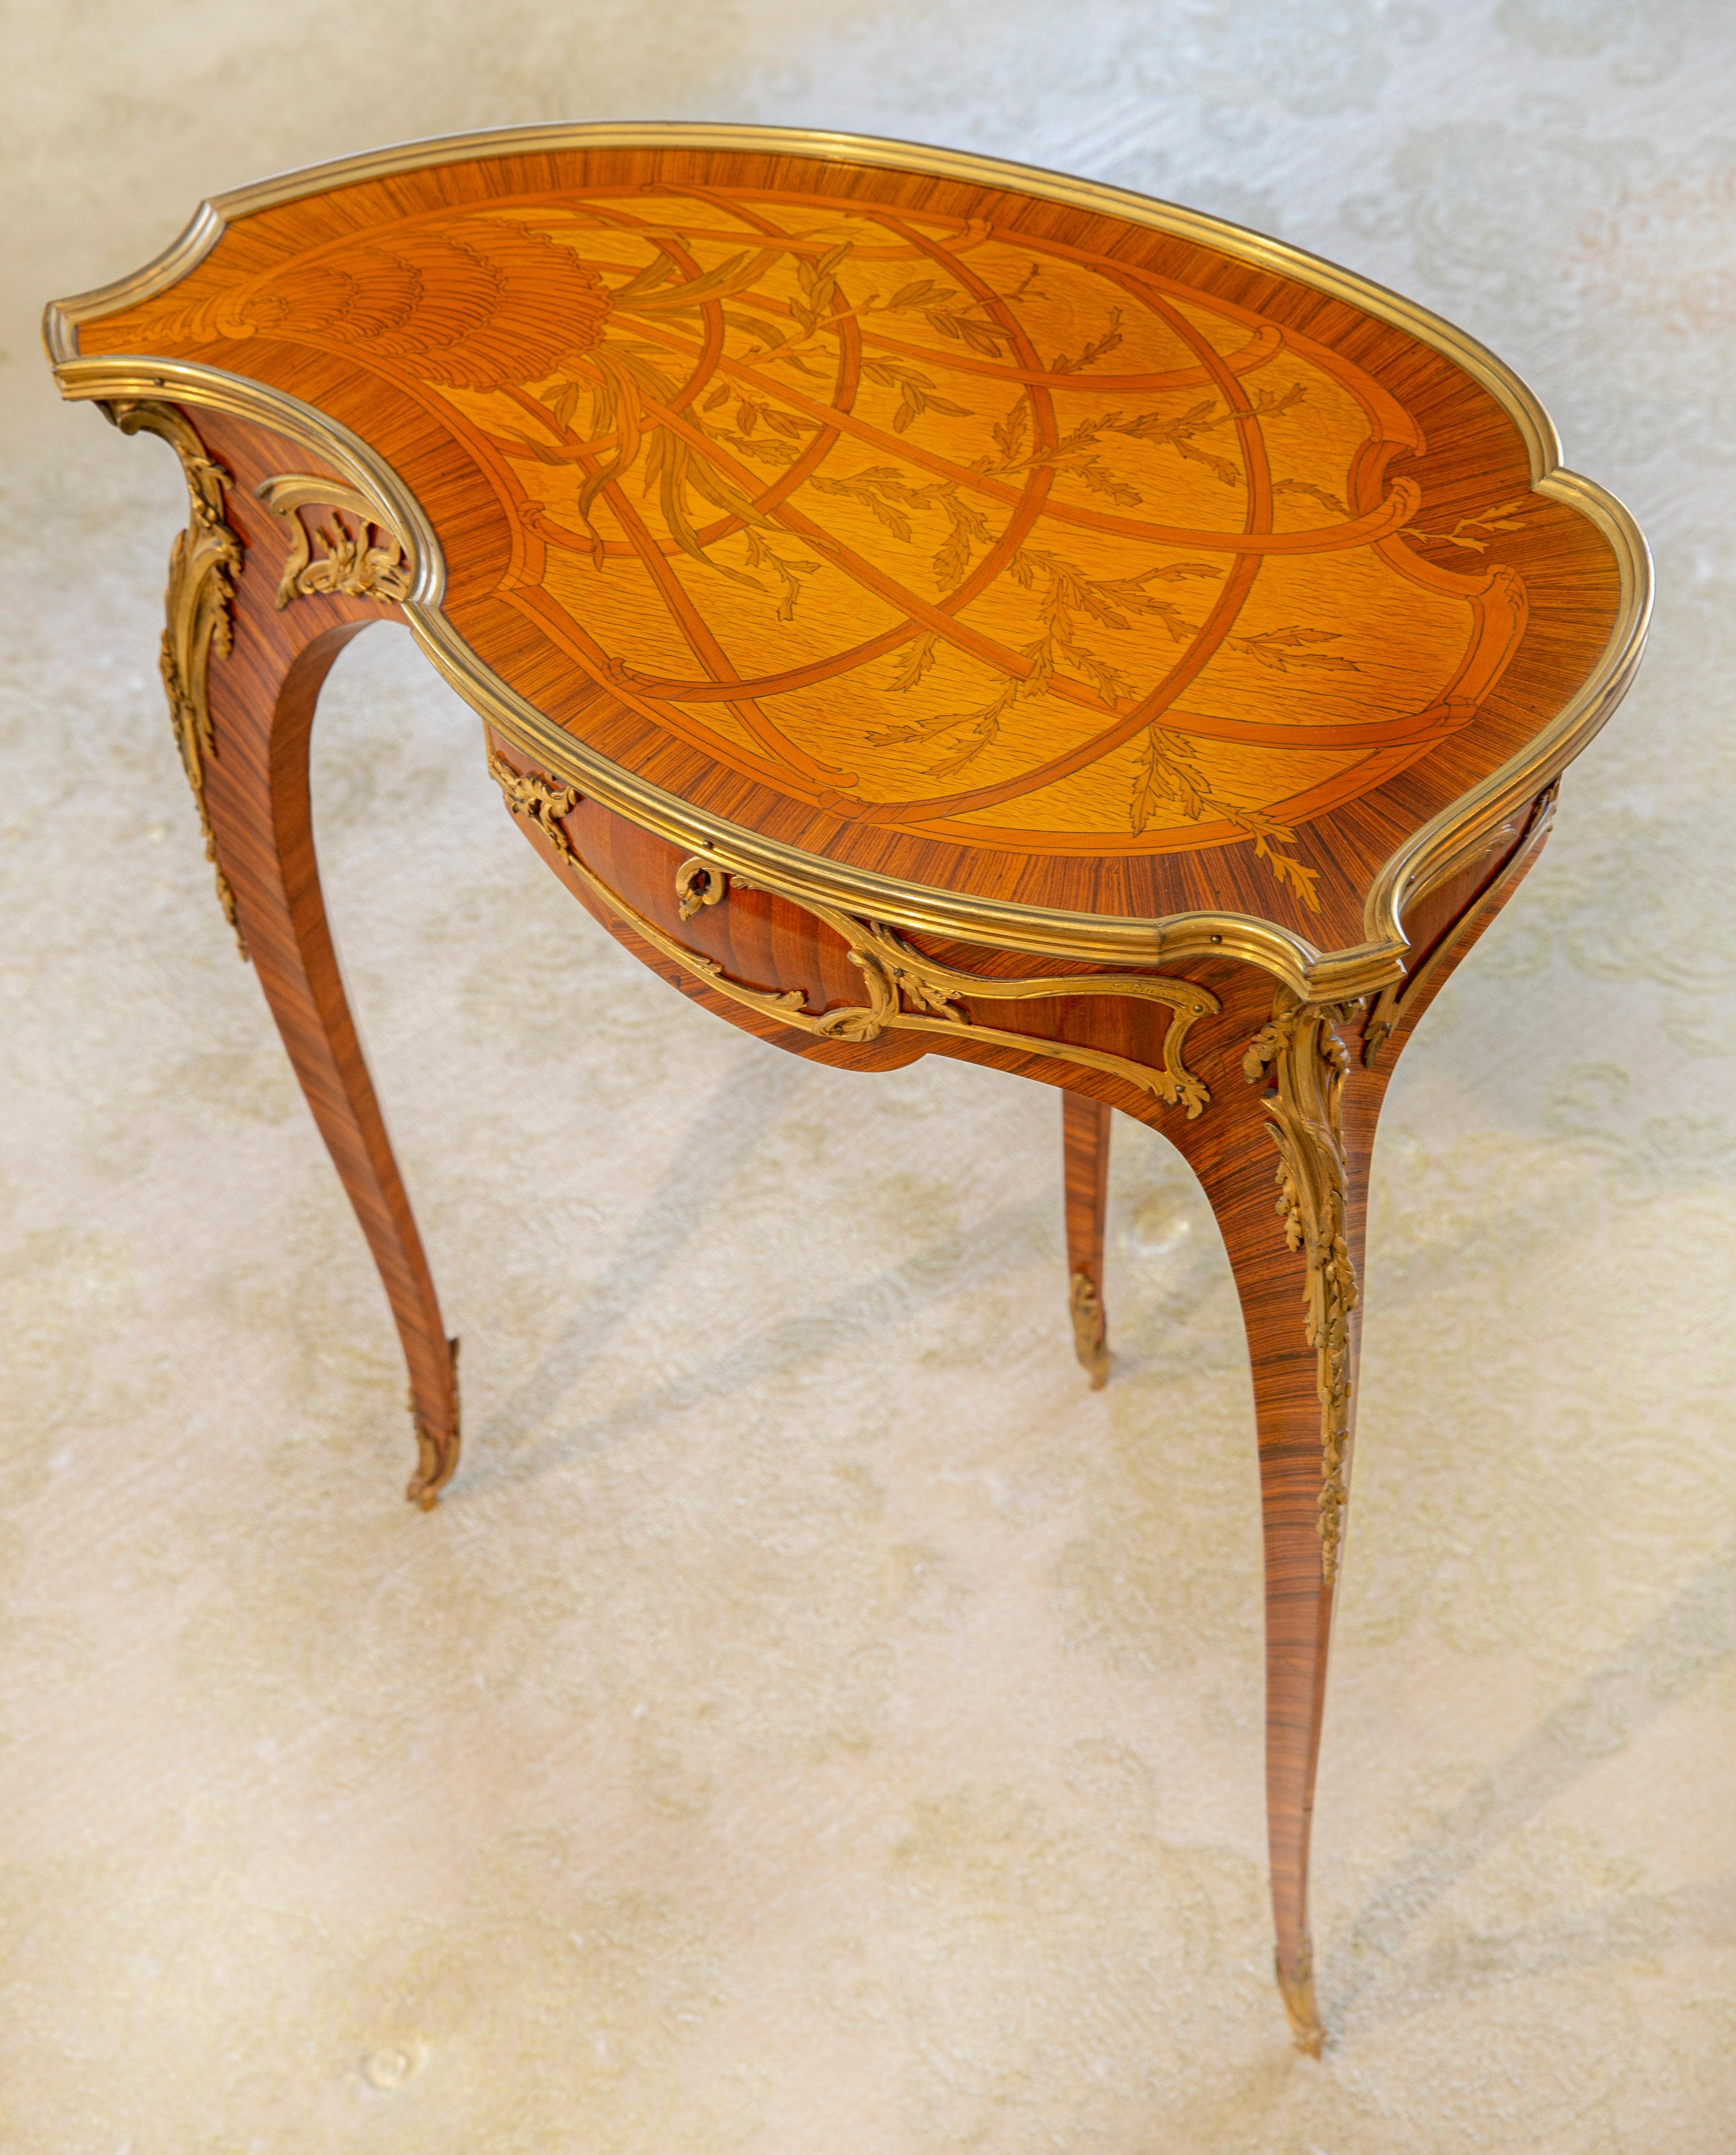 A Very Special Early 20th Century Gilt Bronze Mounted Kingwood, Satiné, Holly and Hornbeam Marquetry “Coquille” Table by François Linke

François Linke – Index Number 544

The beautifully curved table excellently designed, with a shell top and of a